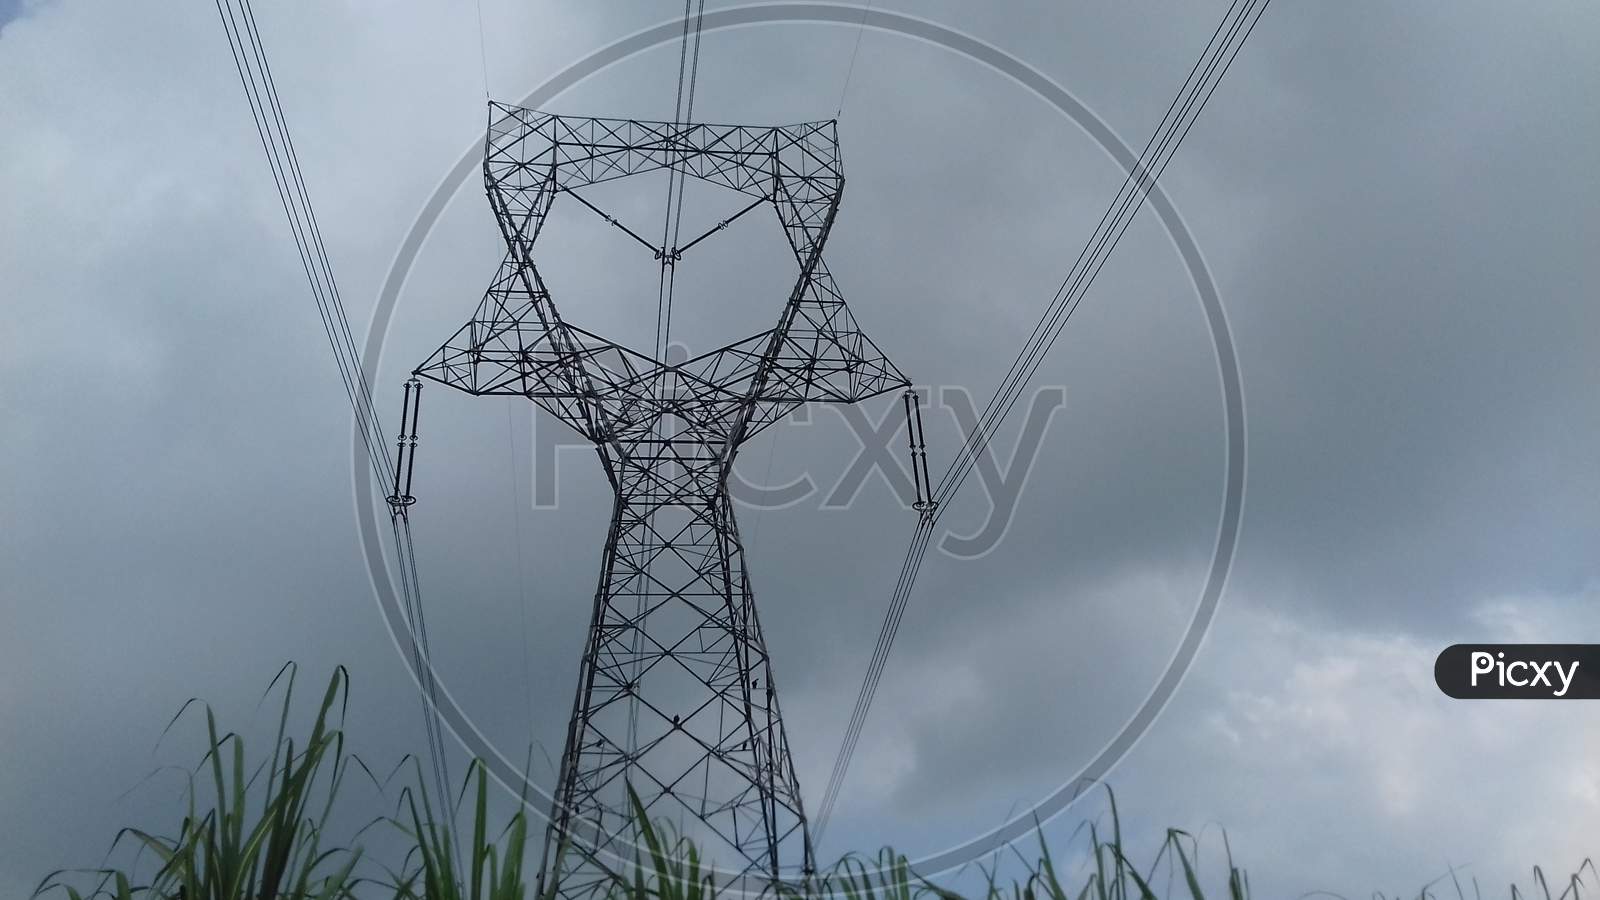 Electrical Energy Transmission Tower - image